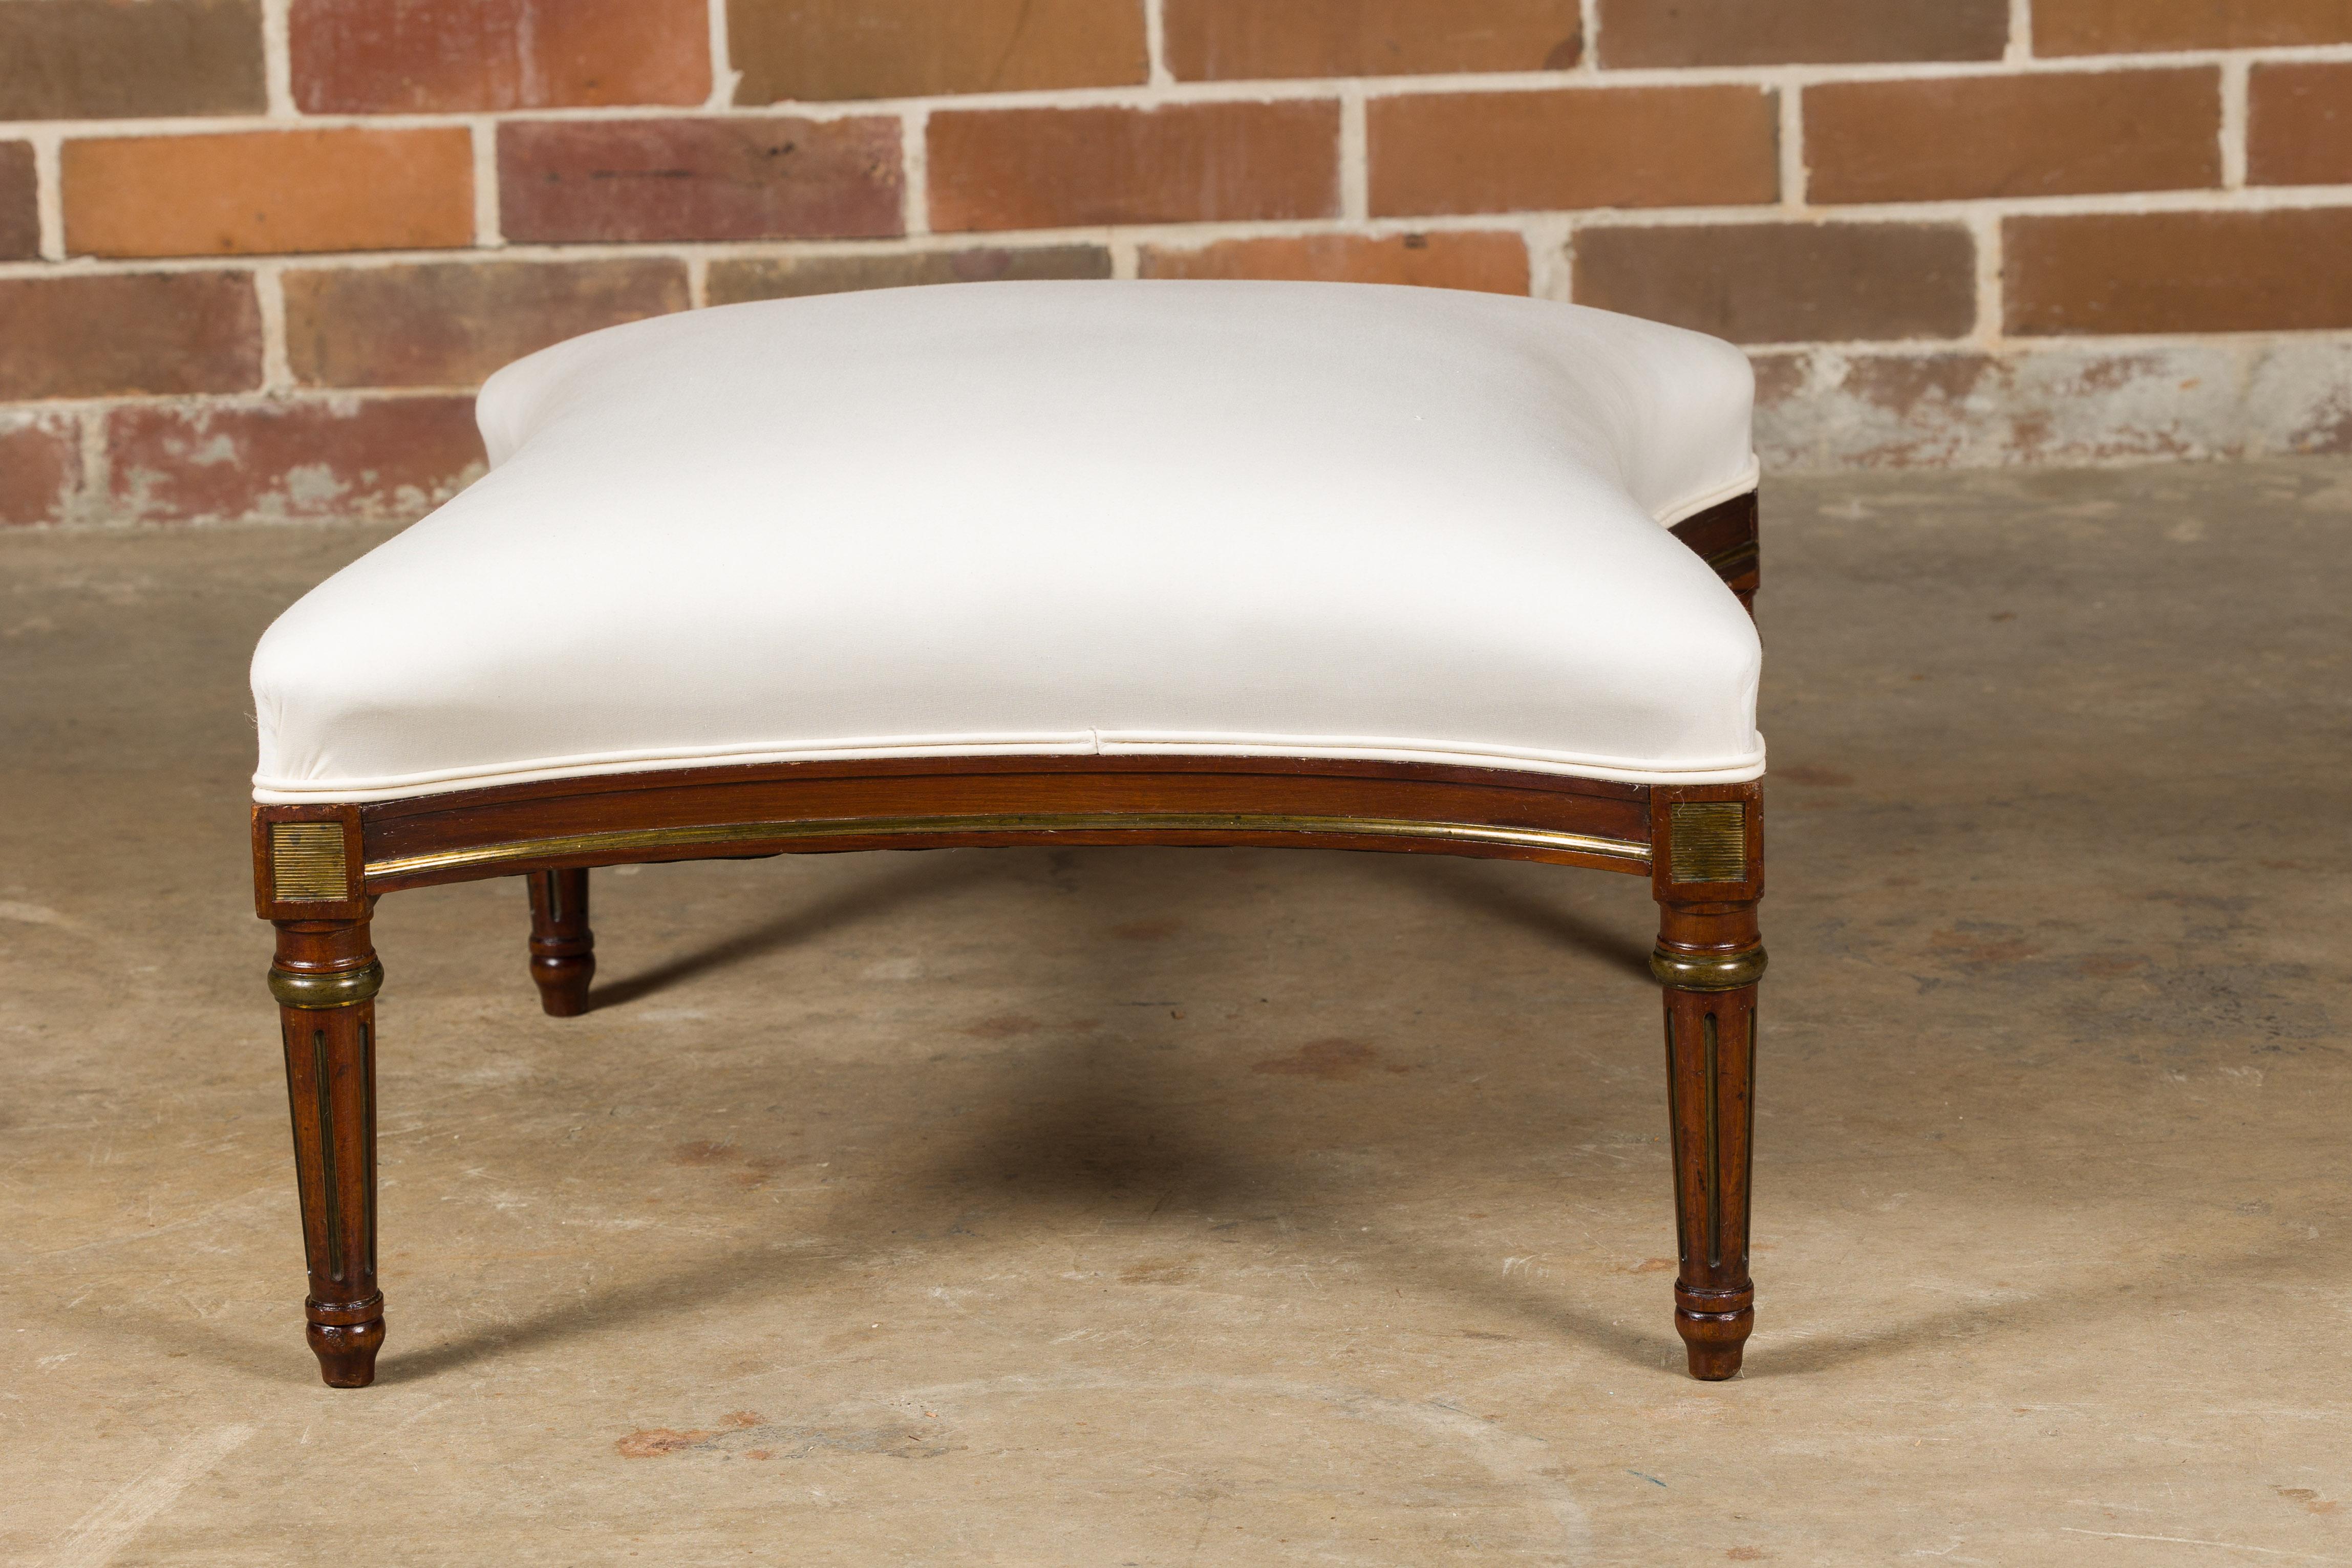 Louis XVI Style French Upholstered Ottoman with Fluted Legs, Gilded Accents In Good Condition For Sale In Atlanta, GA